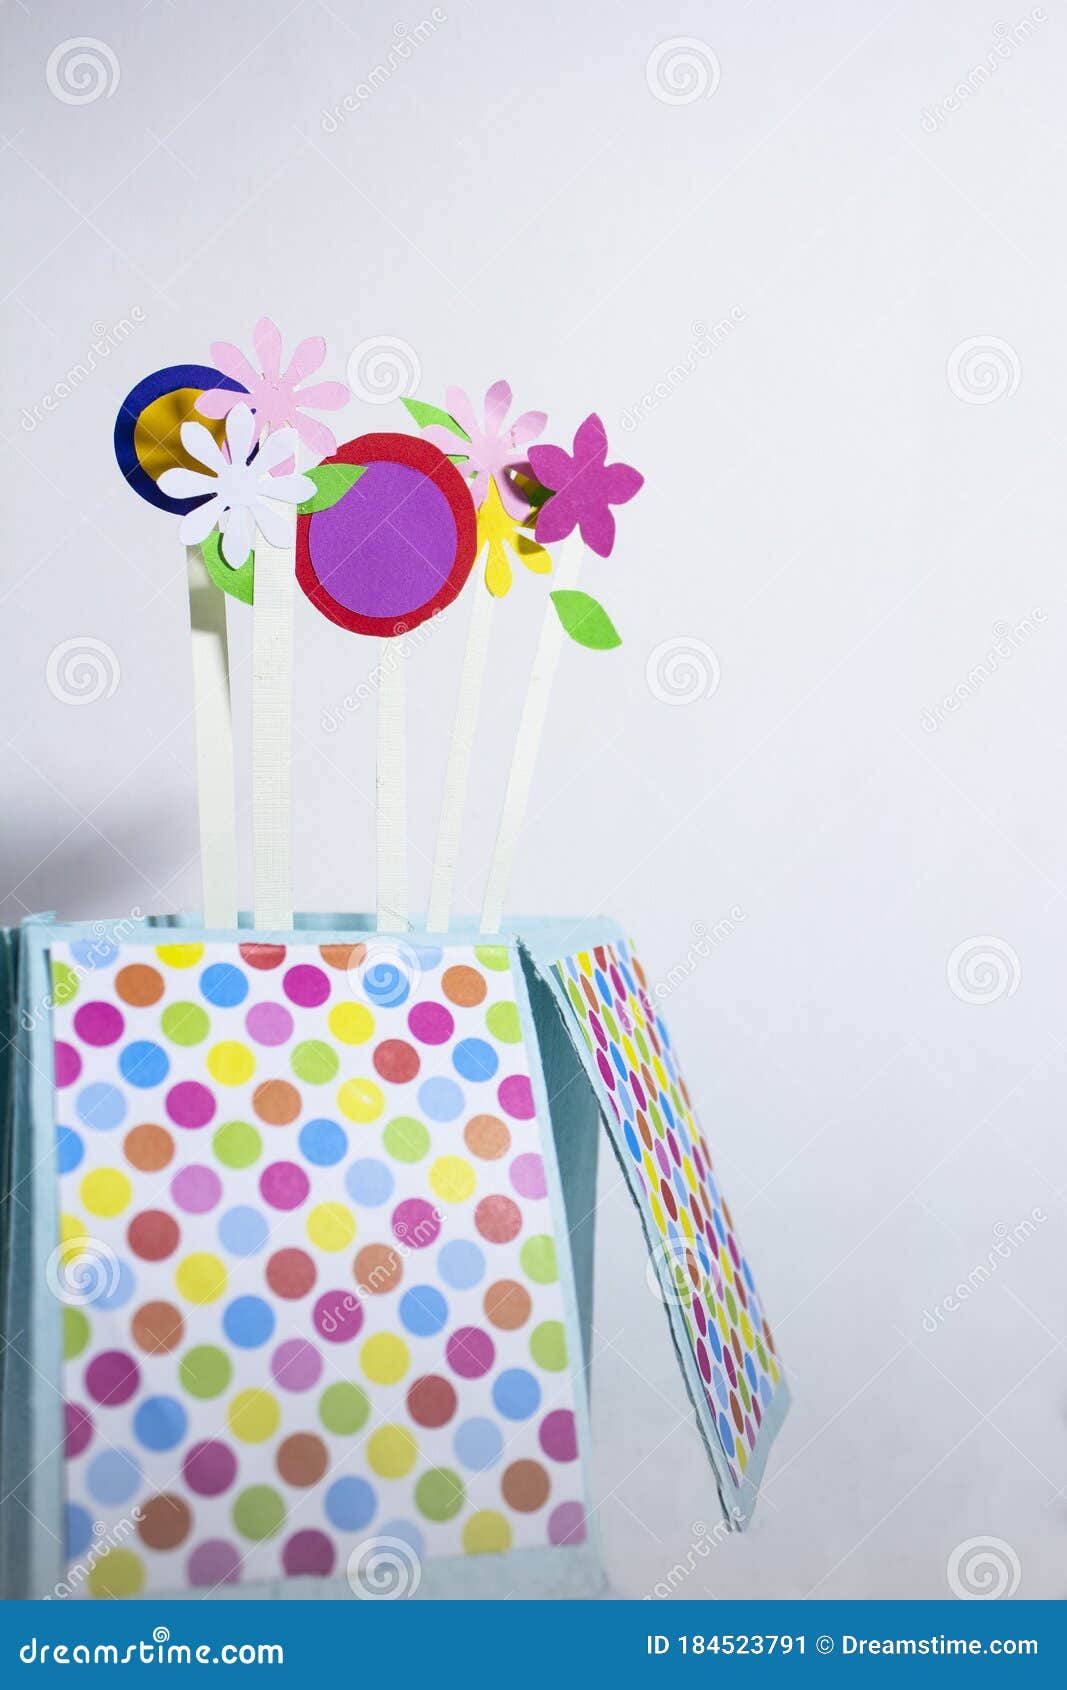 artistic flowers paper anniversary card craft